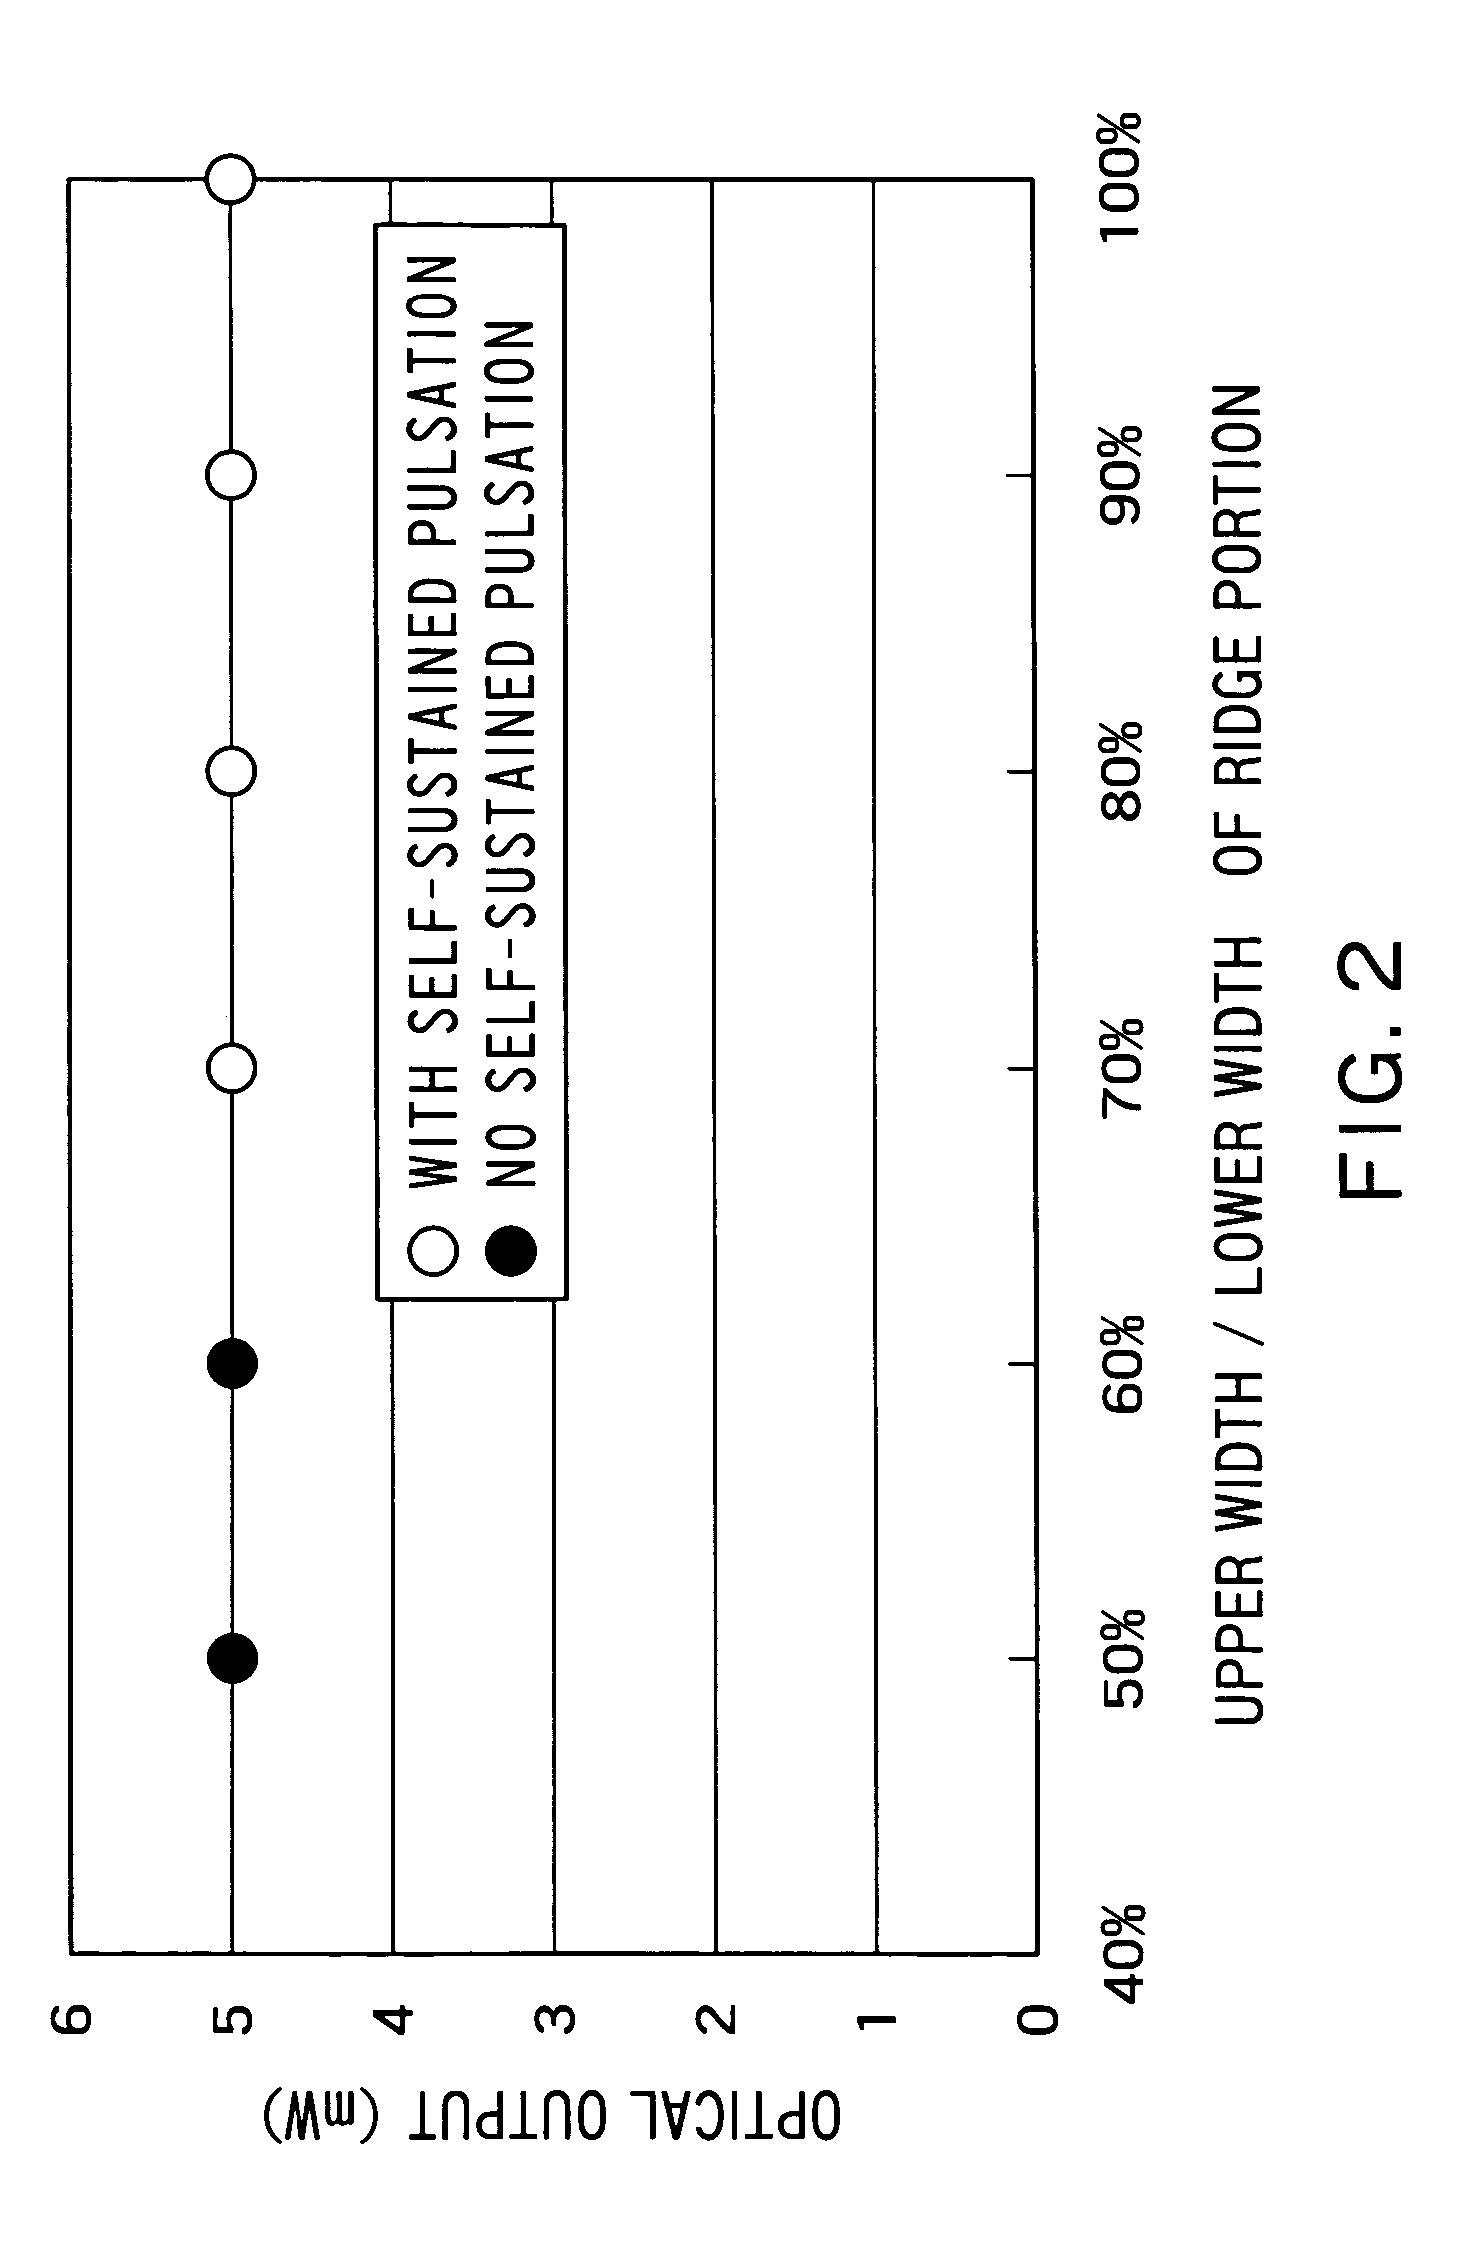 Semiconductor laser element, method of fabrication thereof, and multi-wavelength monolithic semiconductor laser device